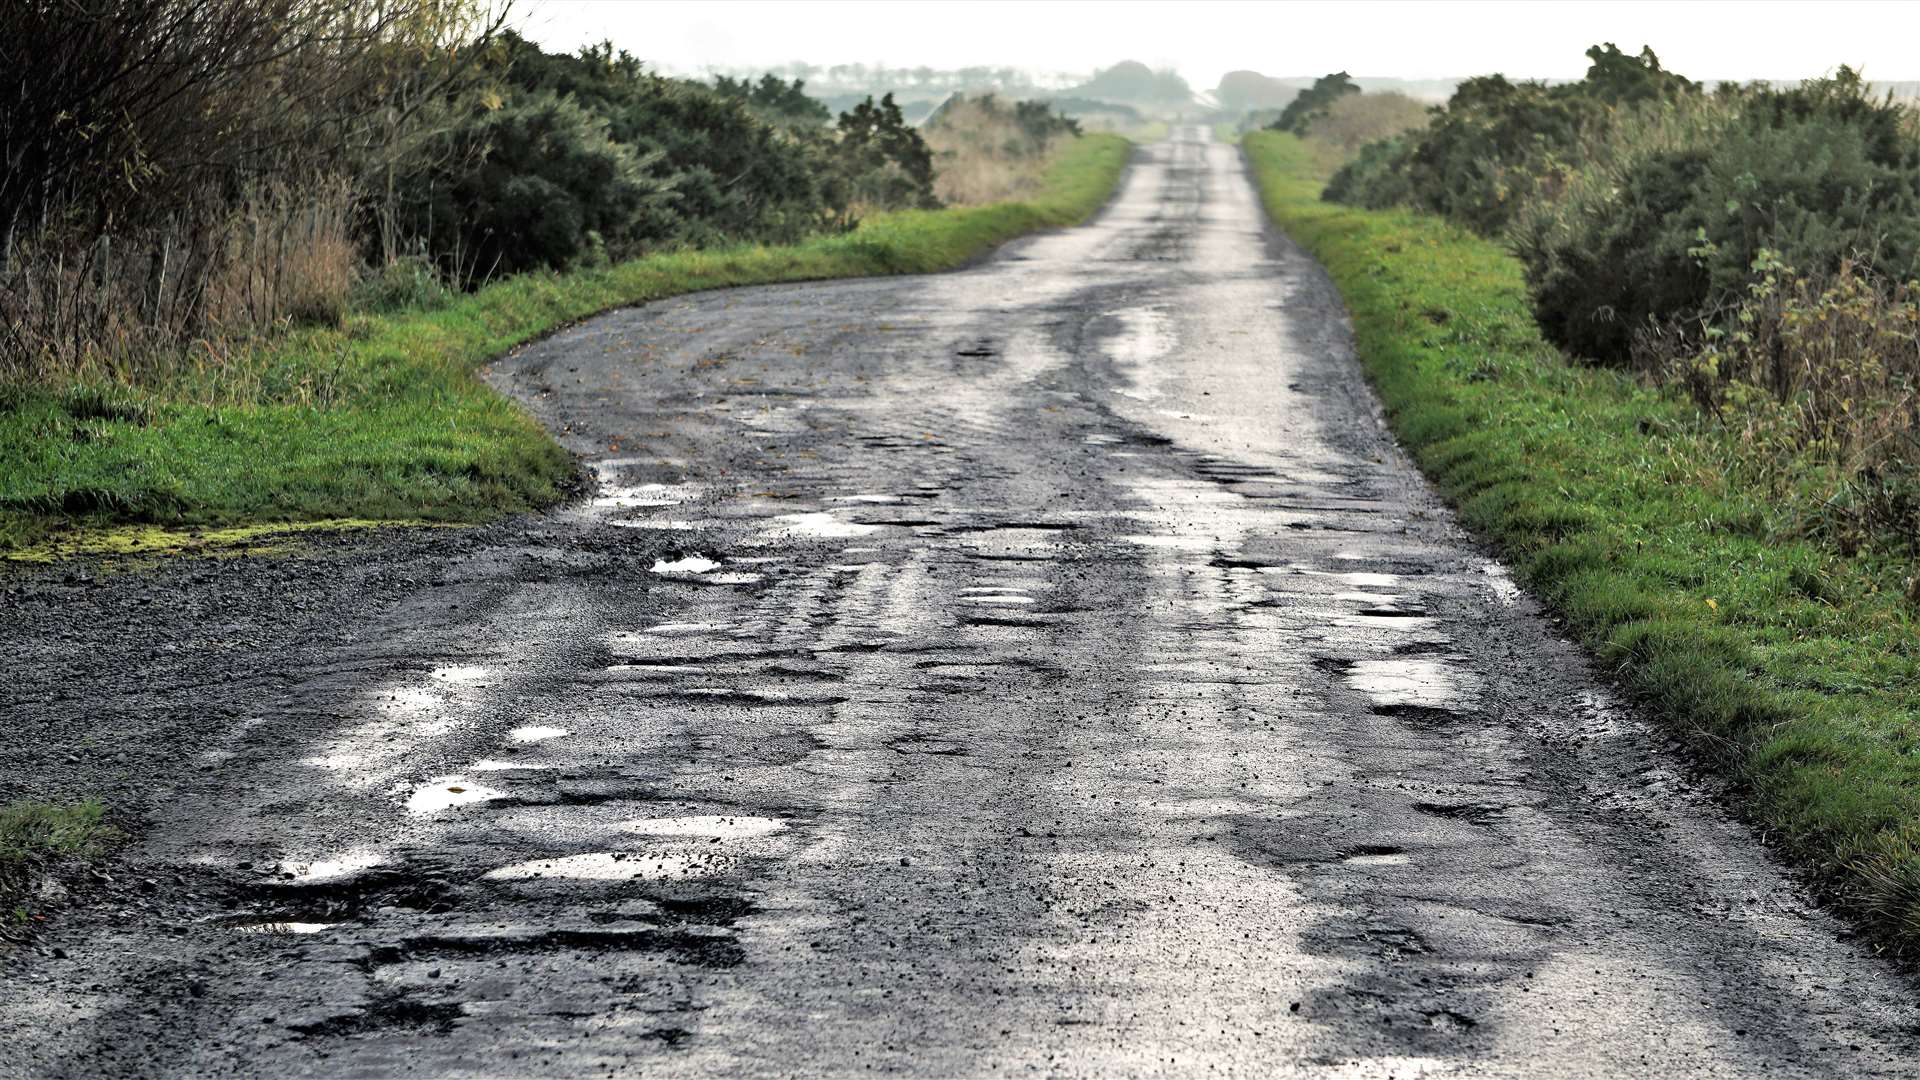 Caithness is blighted by potholes roads like this one near Bower. Cllr McEwan believes there is a disparity between the county's roads and those in Sutherland. Picture: DGS